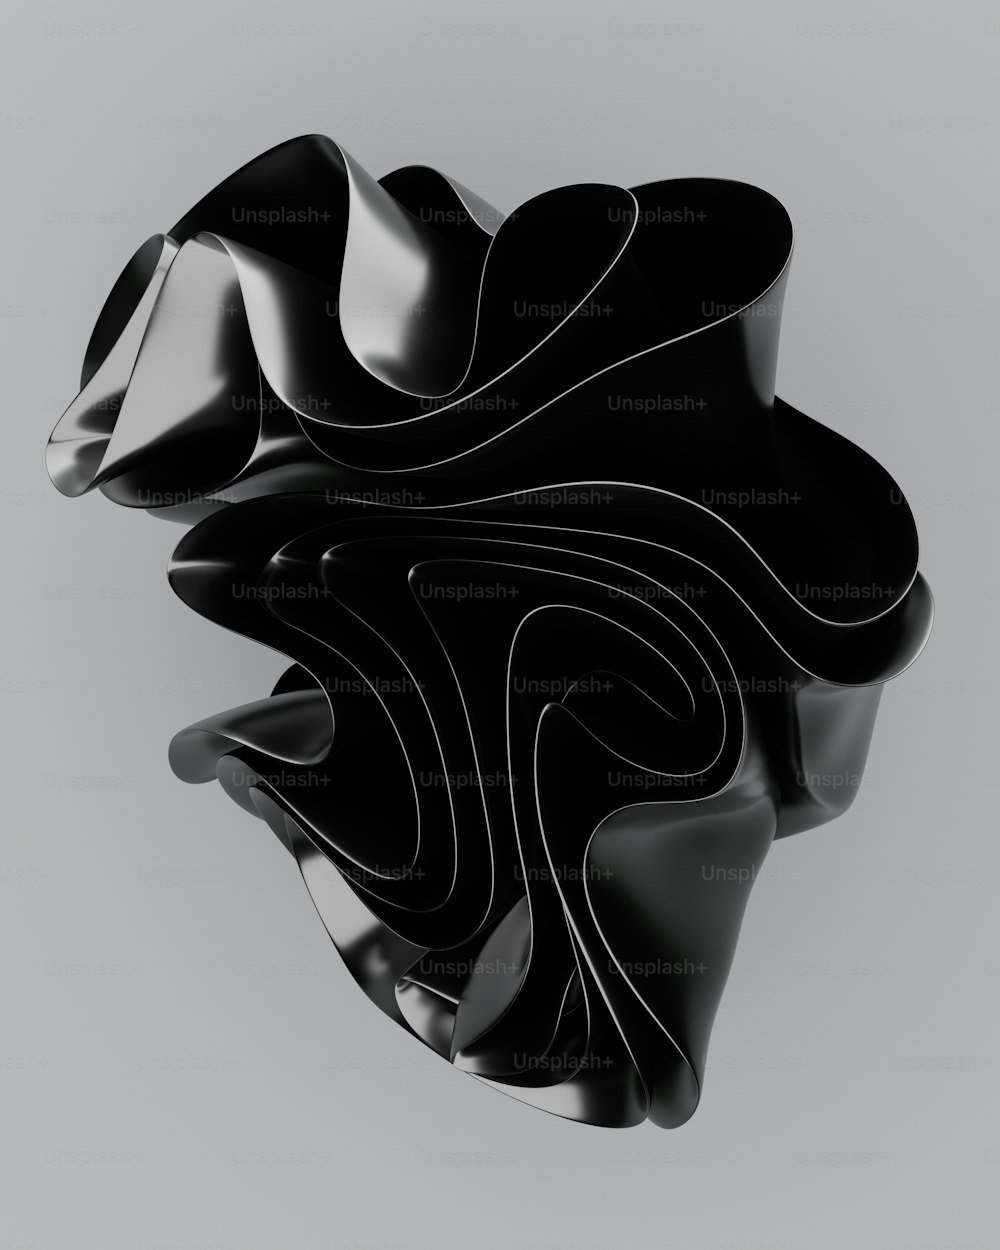 a black and white photo of a sculpture